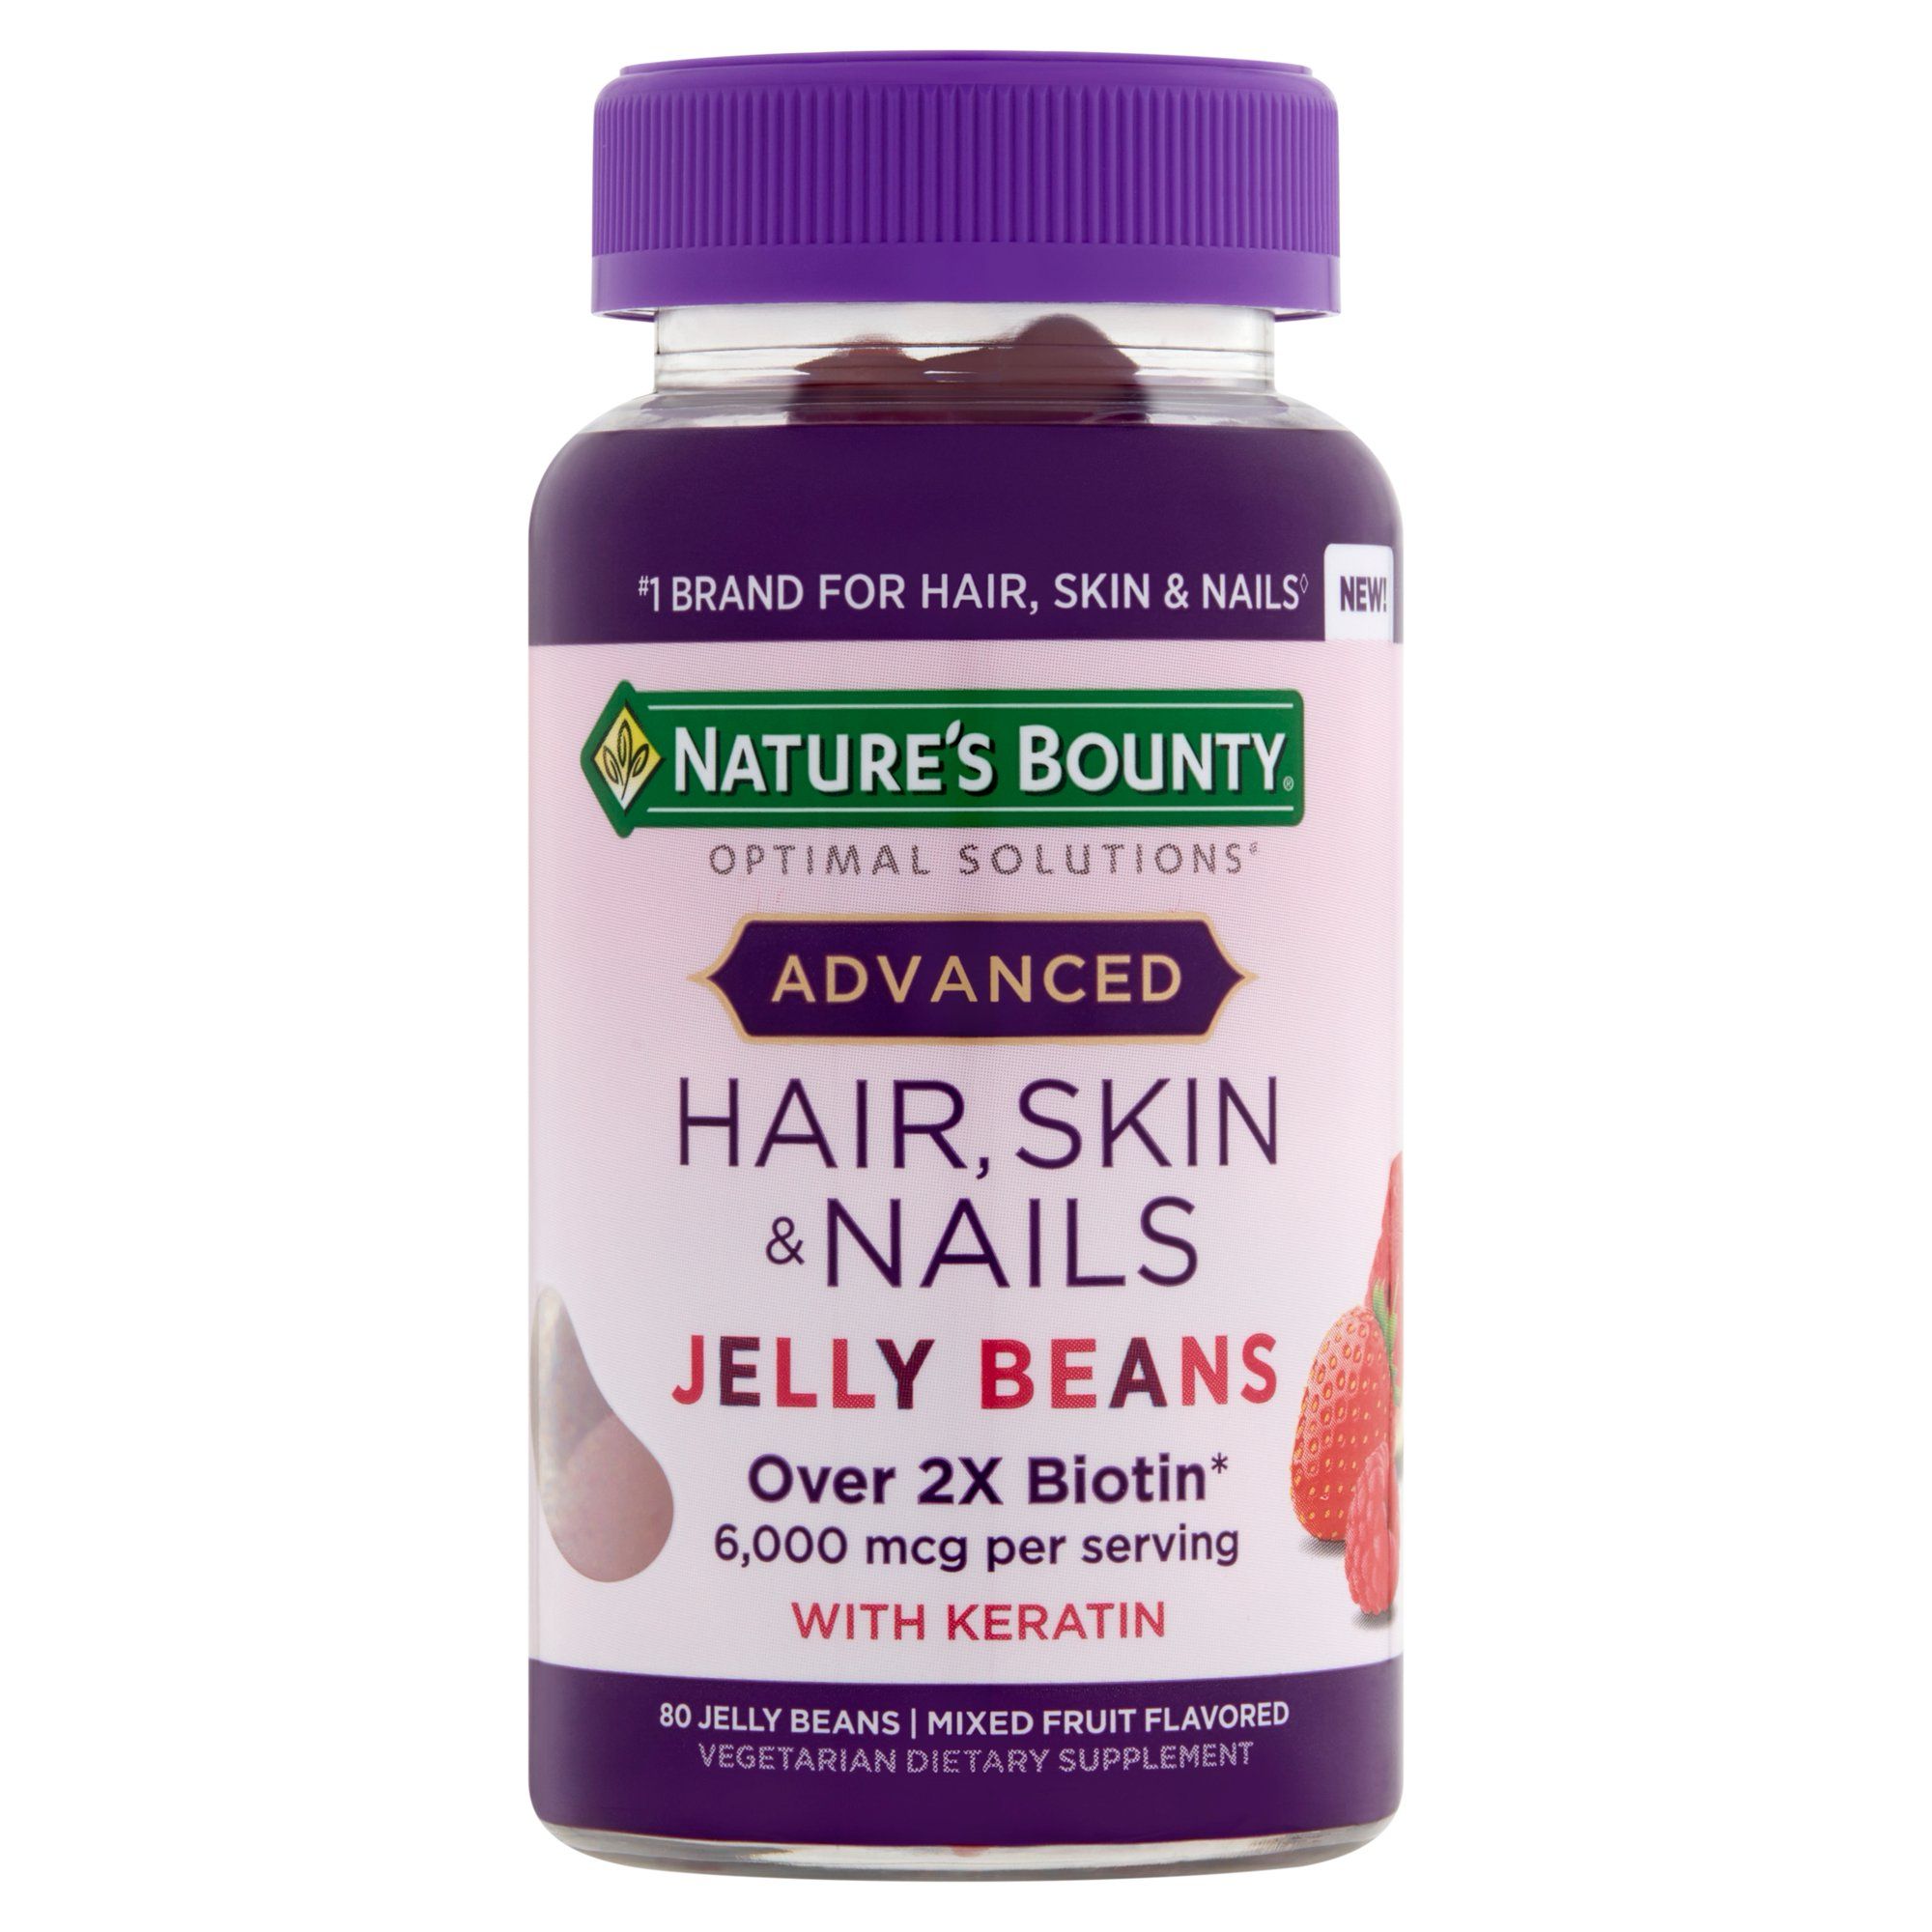 Nature's Bounty Advanced Hair, Skin & Nails Jelly Beans with Biotin - 80 ct